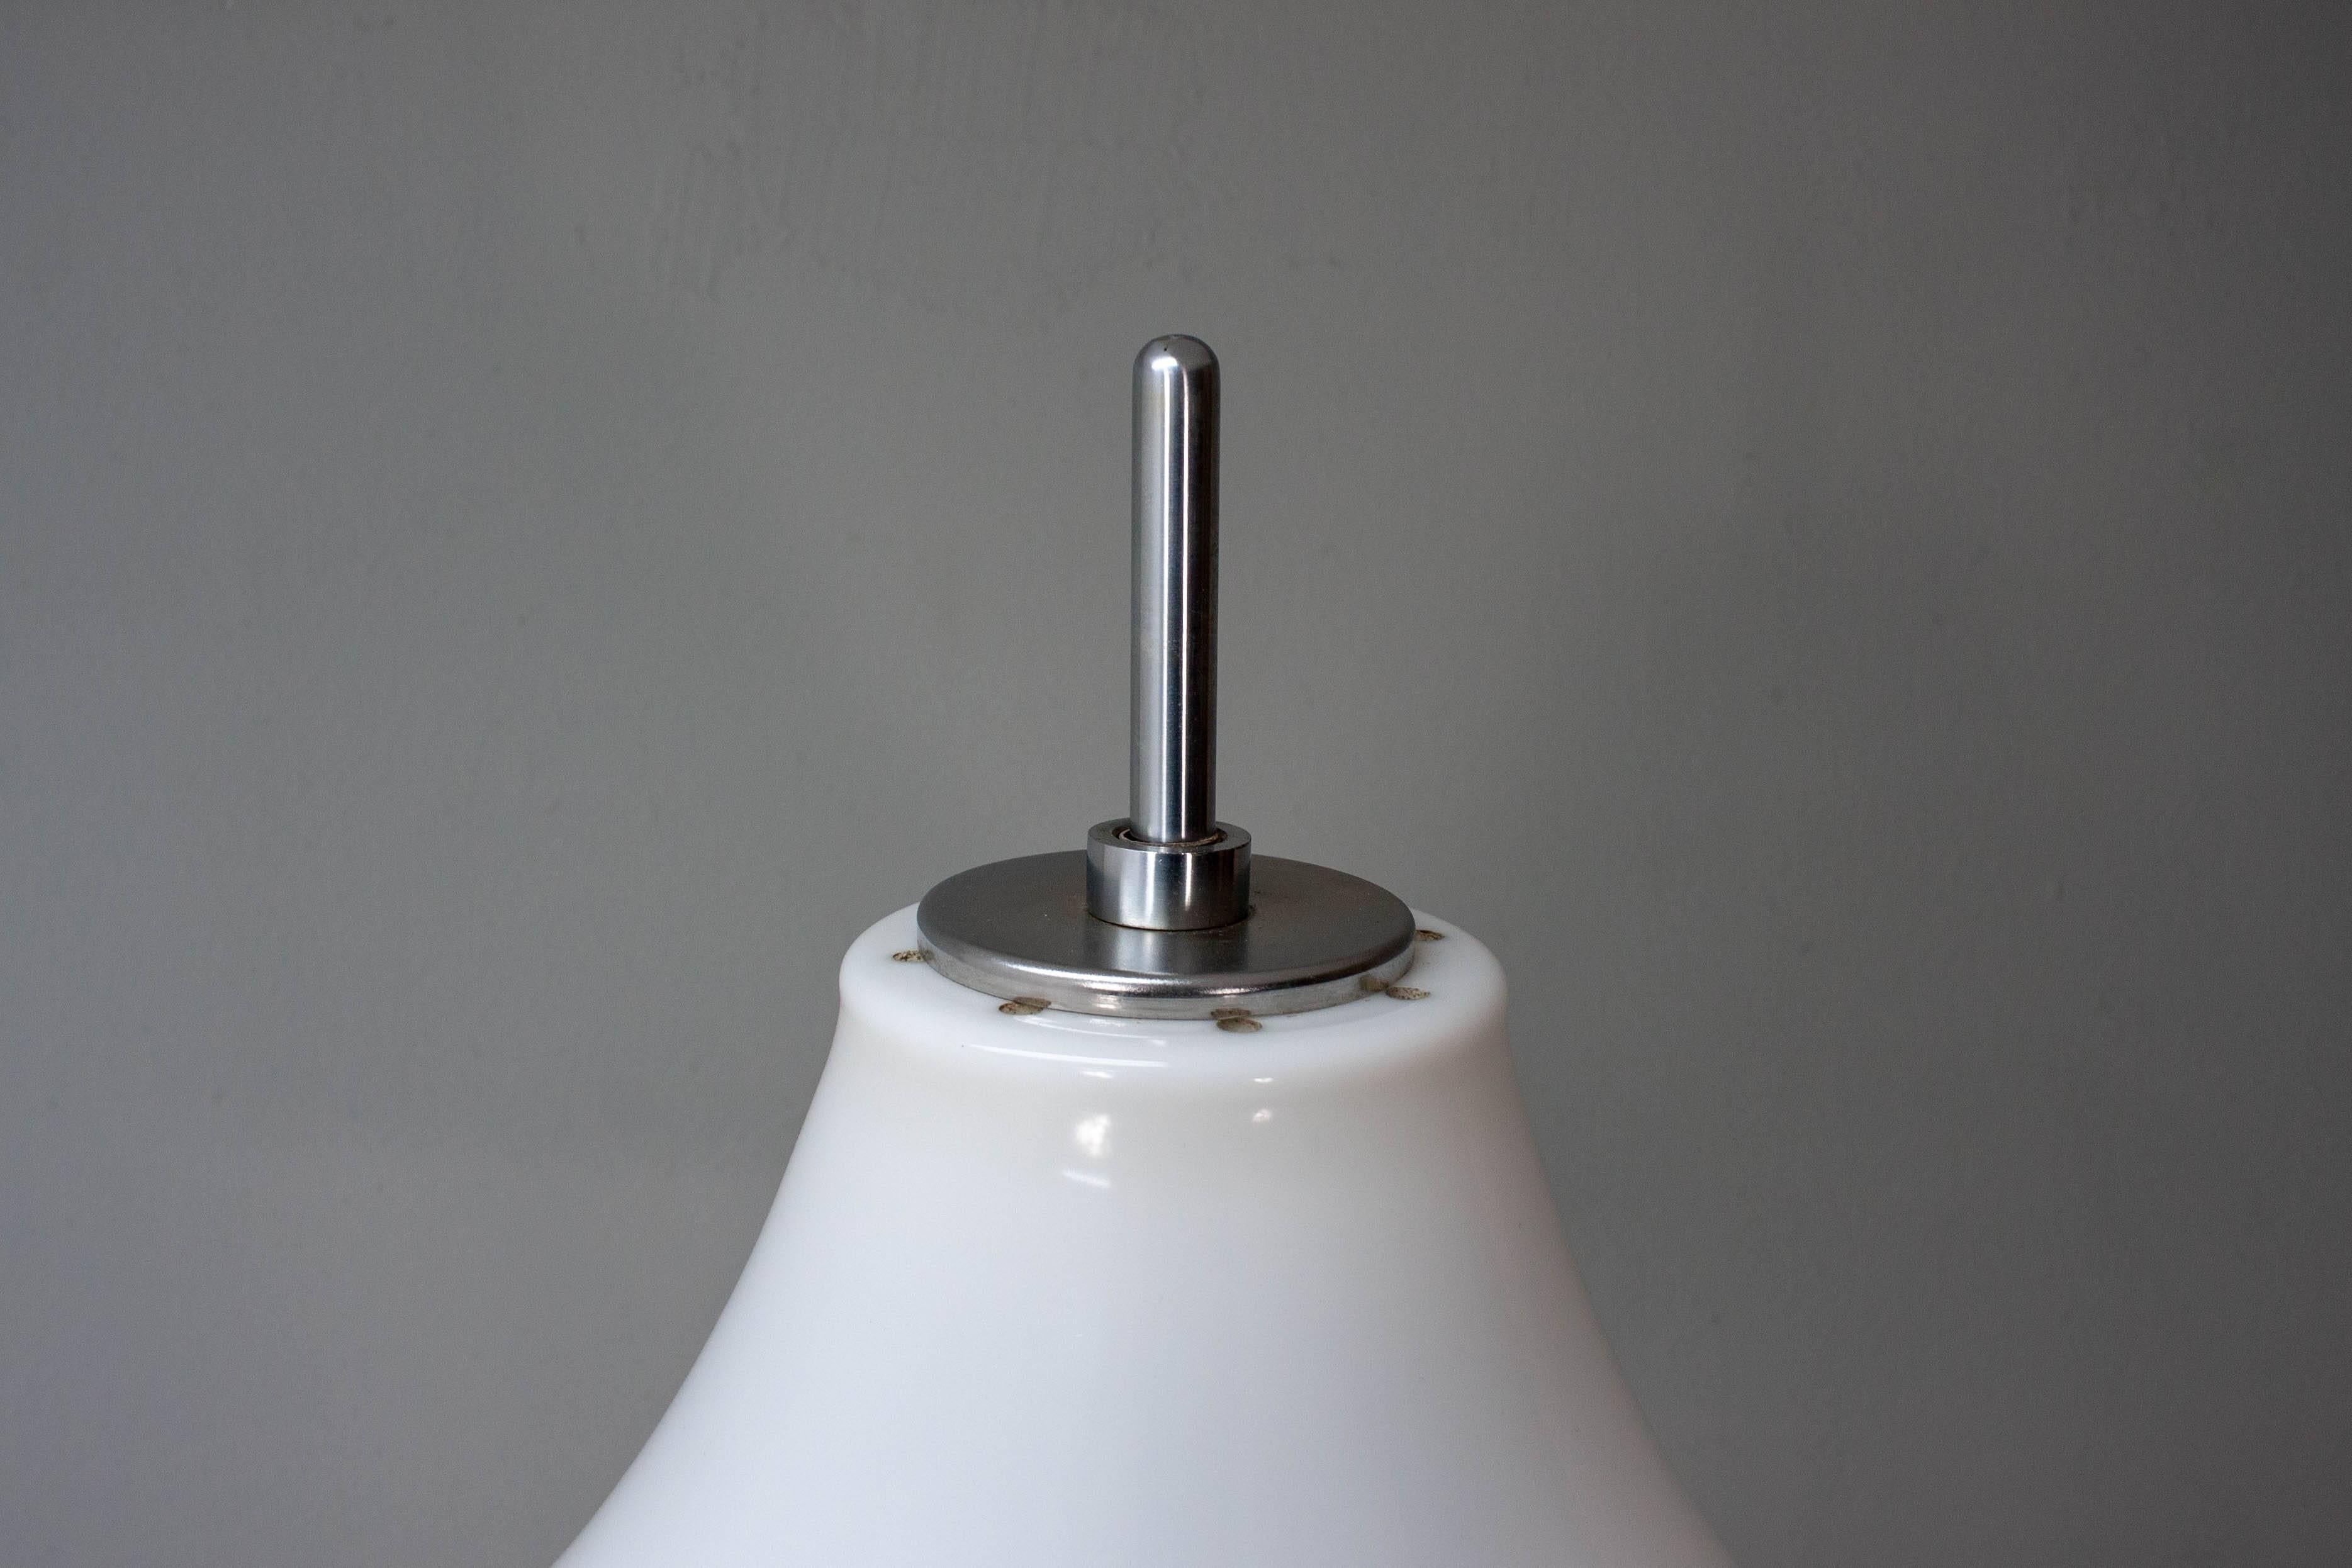 Stylish height-adjustable floor lamp from Gepo, Amsterdam  1970s. The lampshade/armature assembly slides up and down a central post (it can go all the way to the floor if desired). Original Perspex shade and in overall very nice shape.